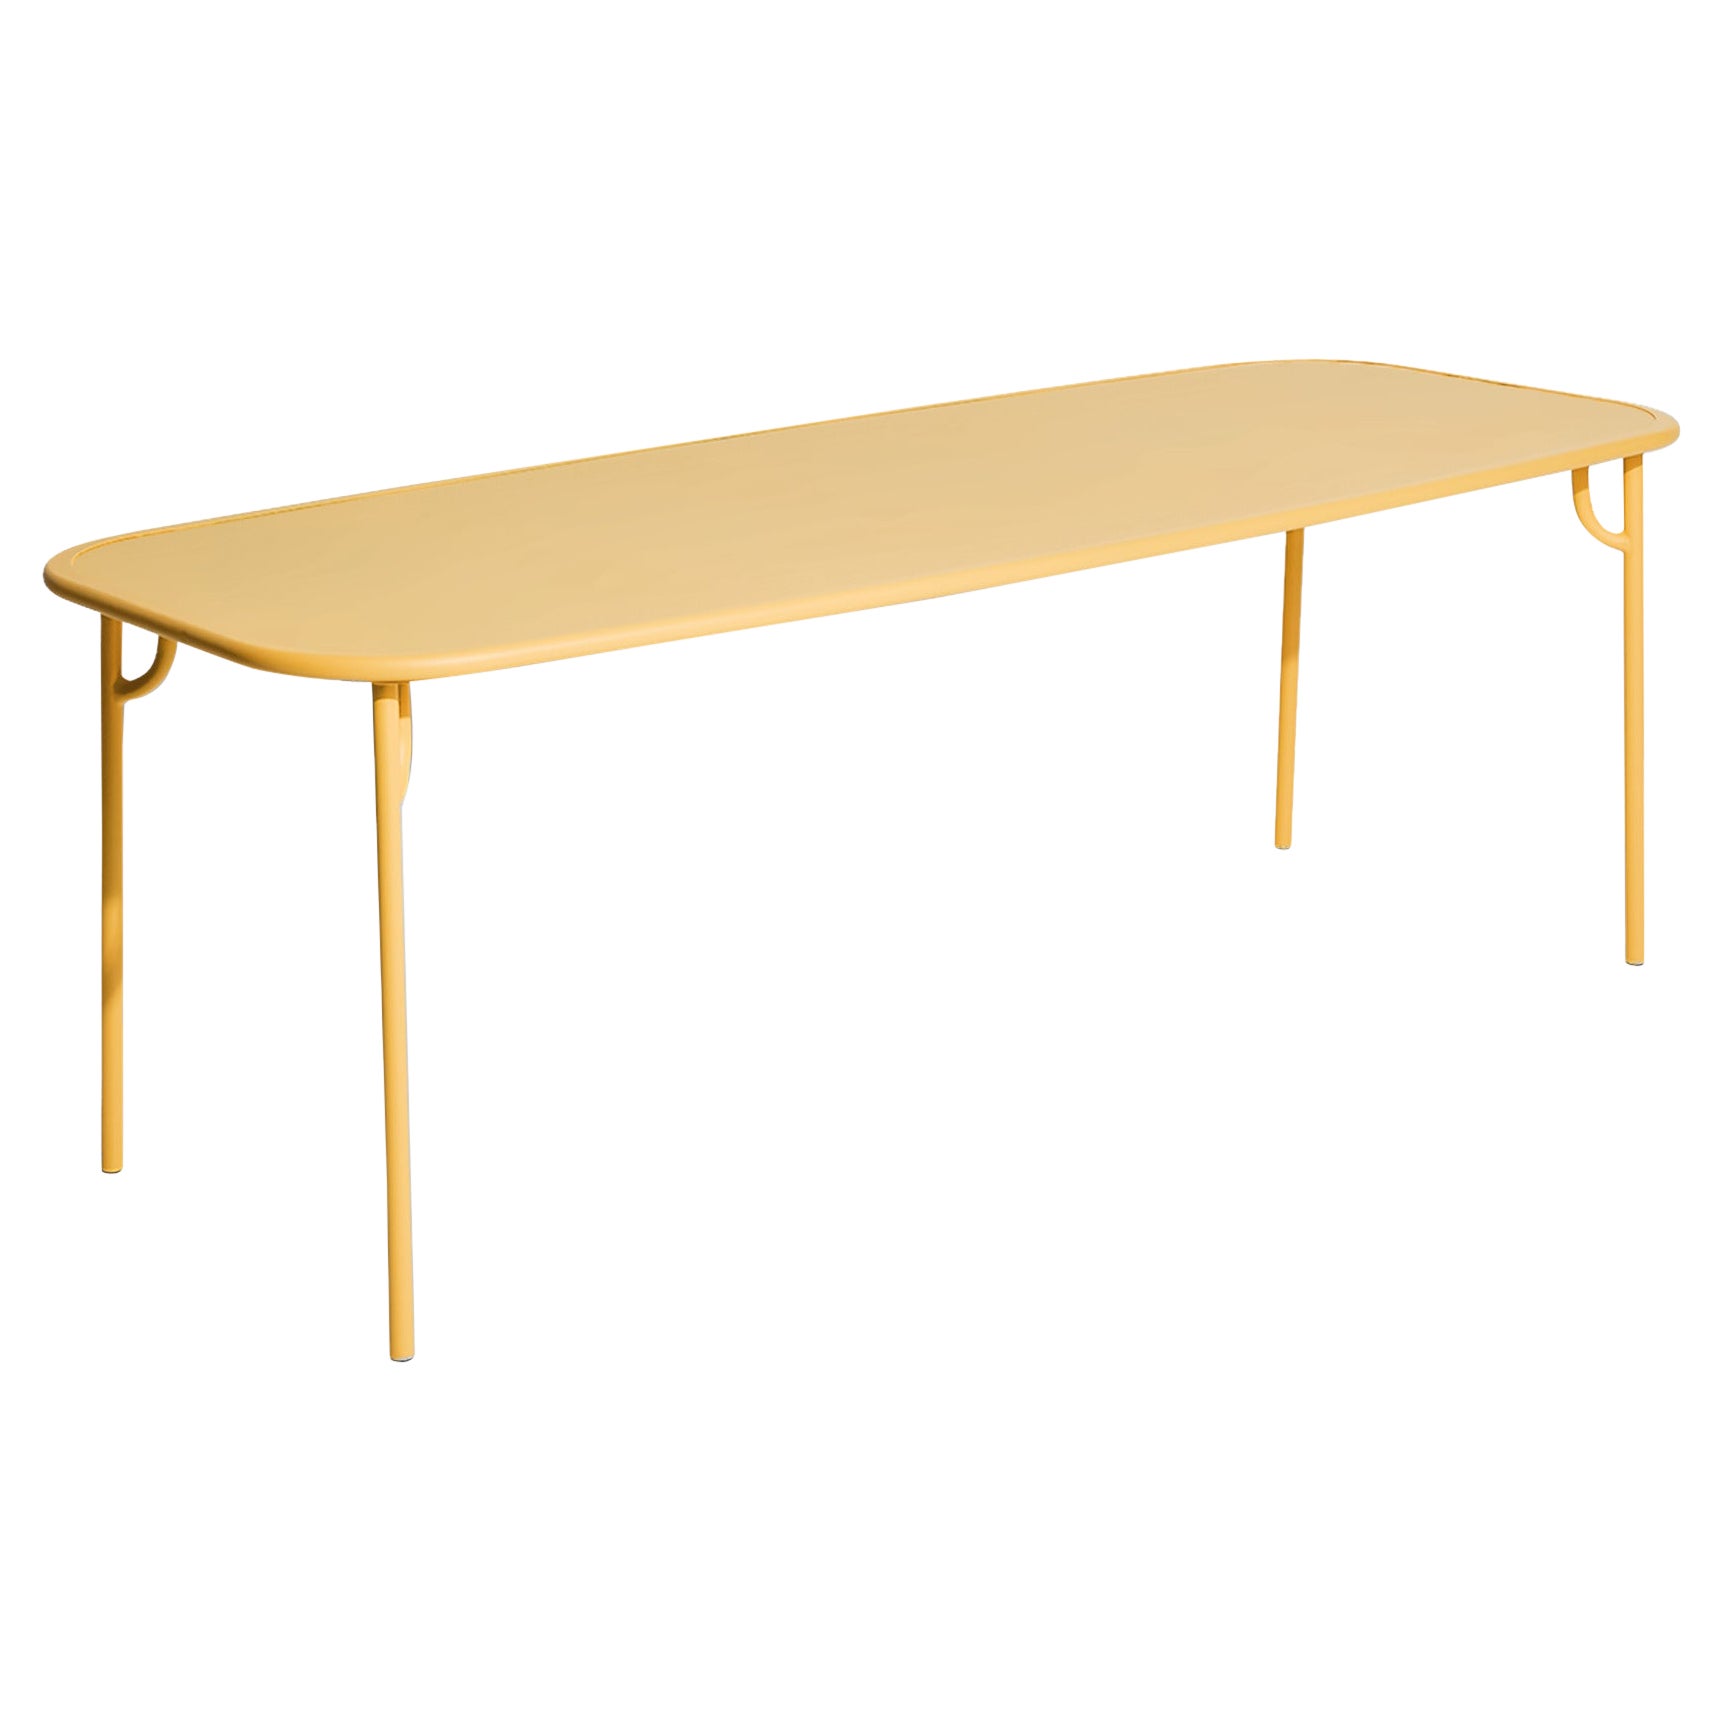 Petite Friture Week-End Large Plain Rectangular Dining Table in Saffron, 2017 For Sale